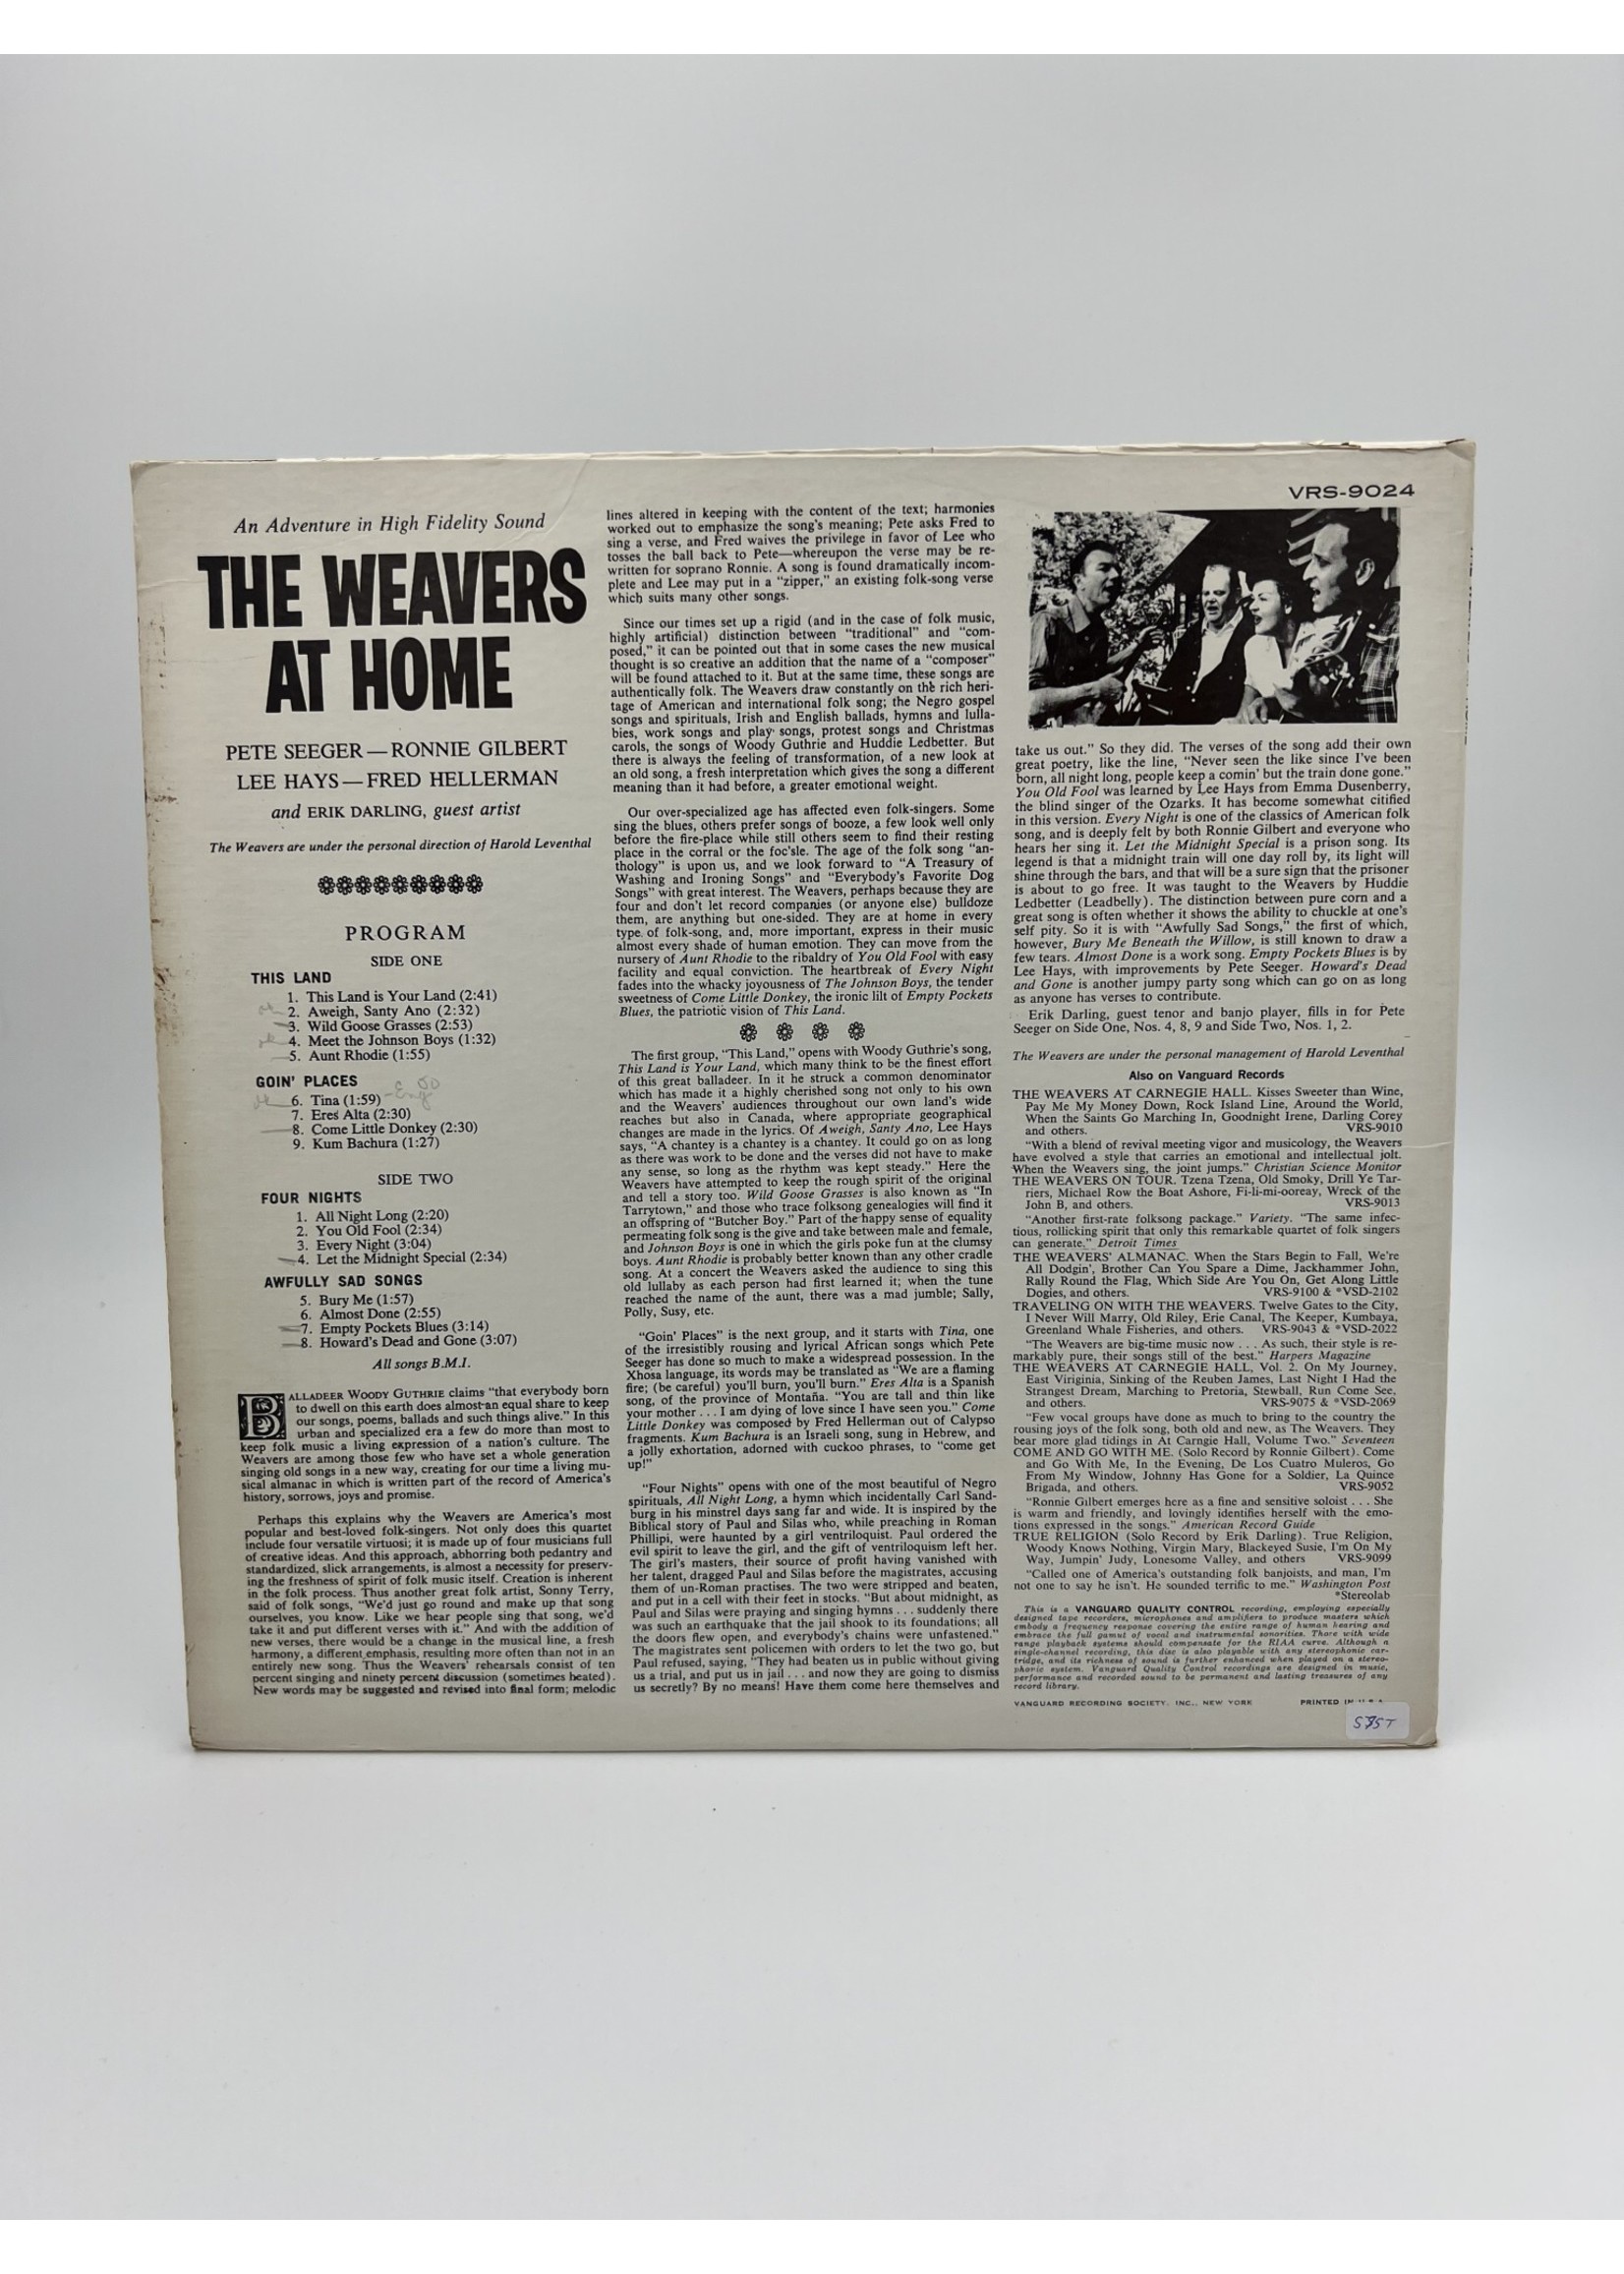 LP The Weavers At Home LP RECORD